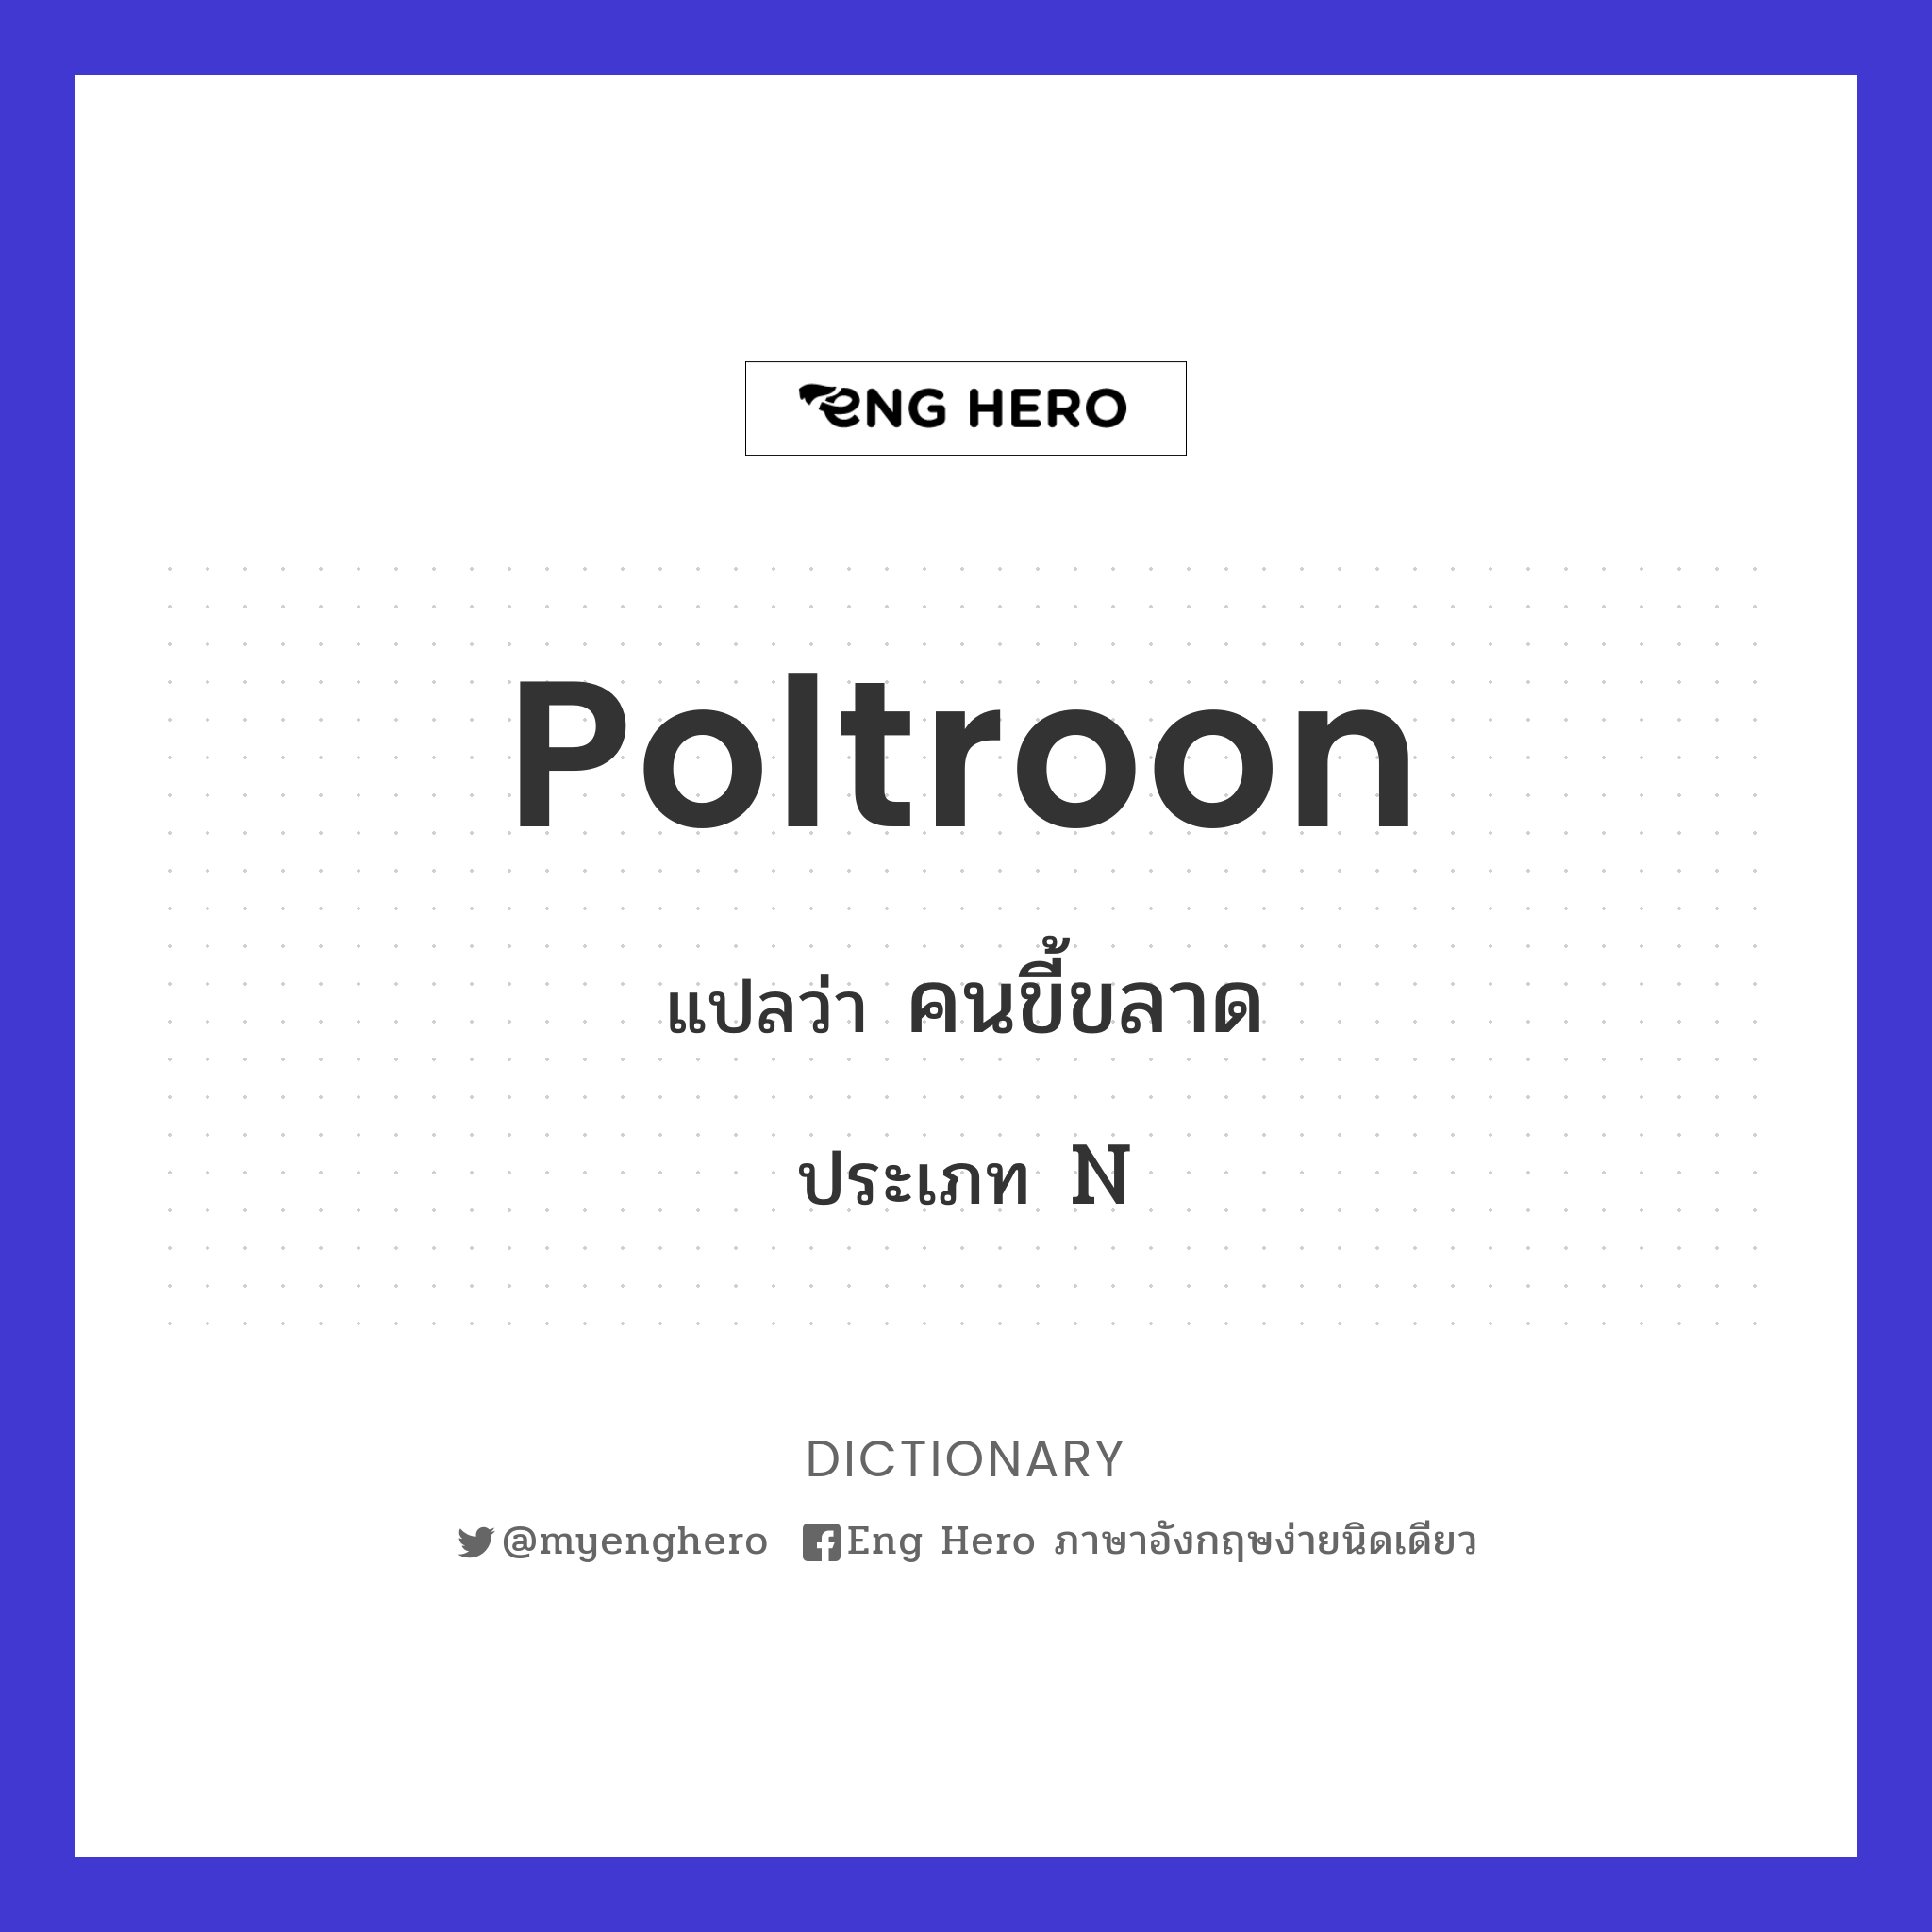 poltroon